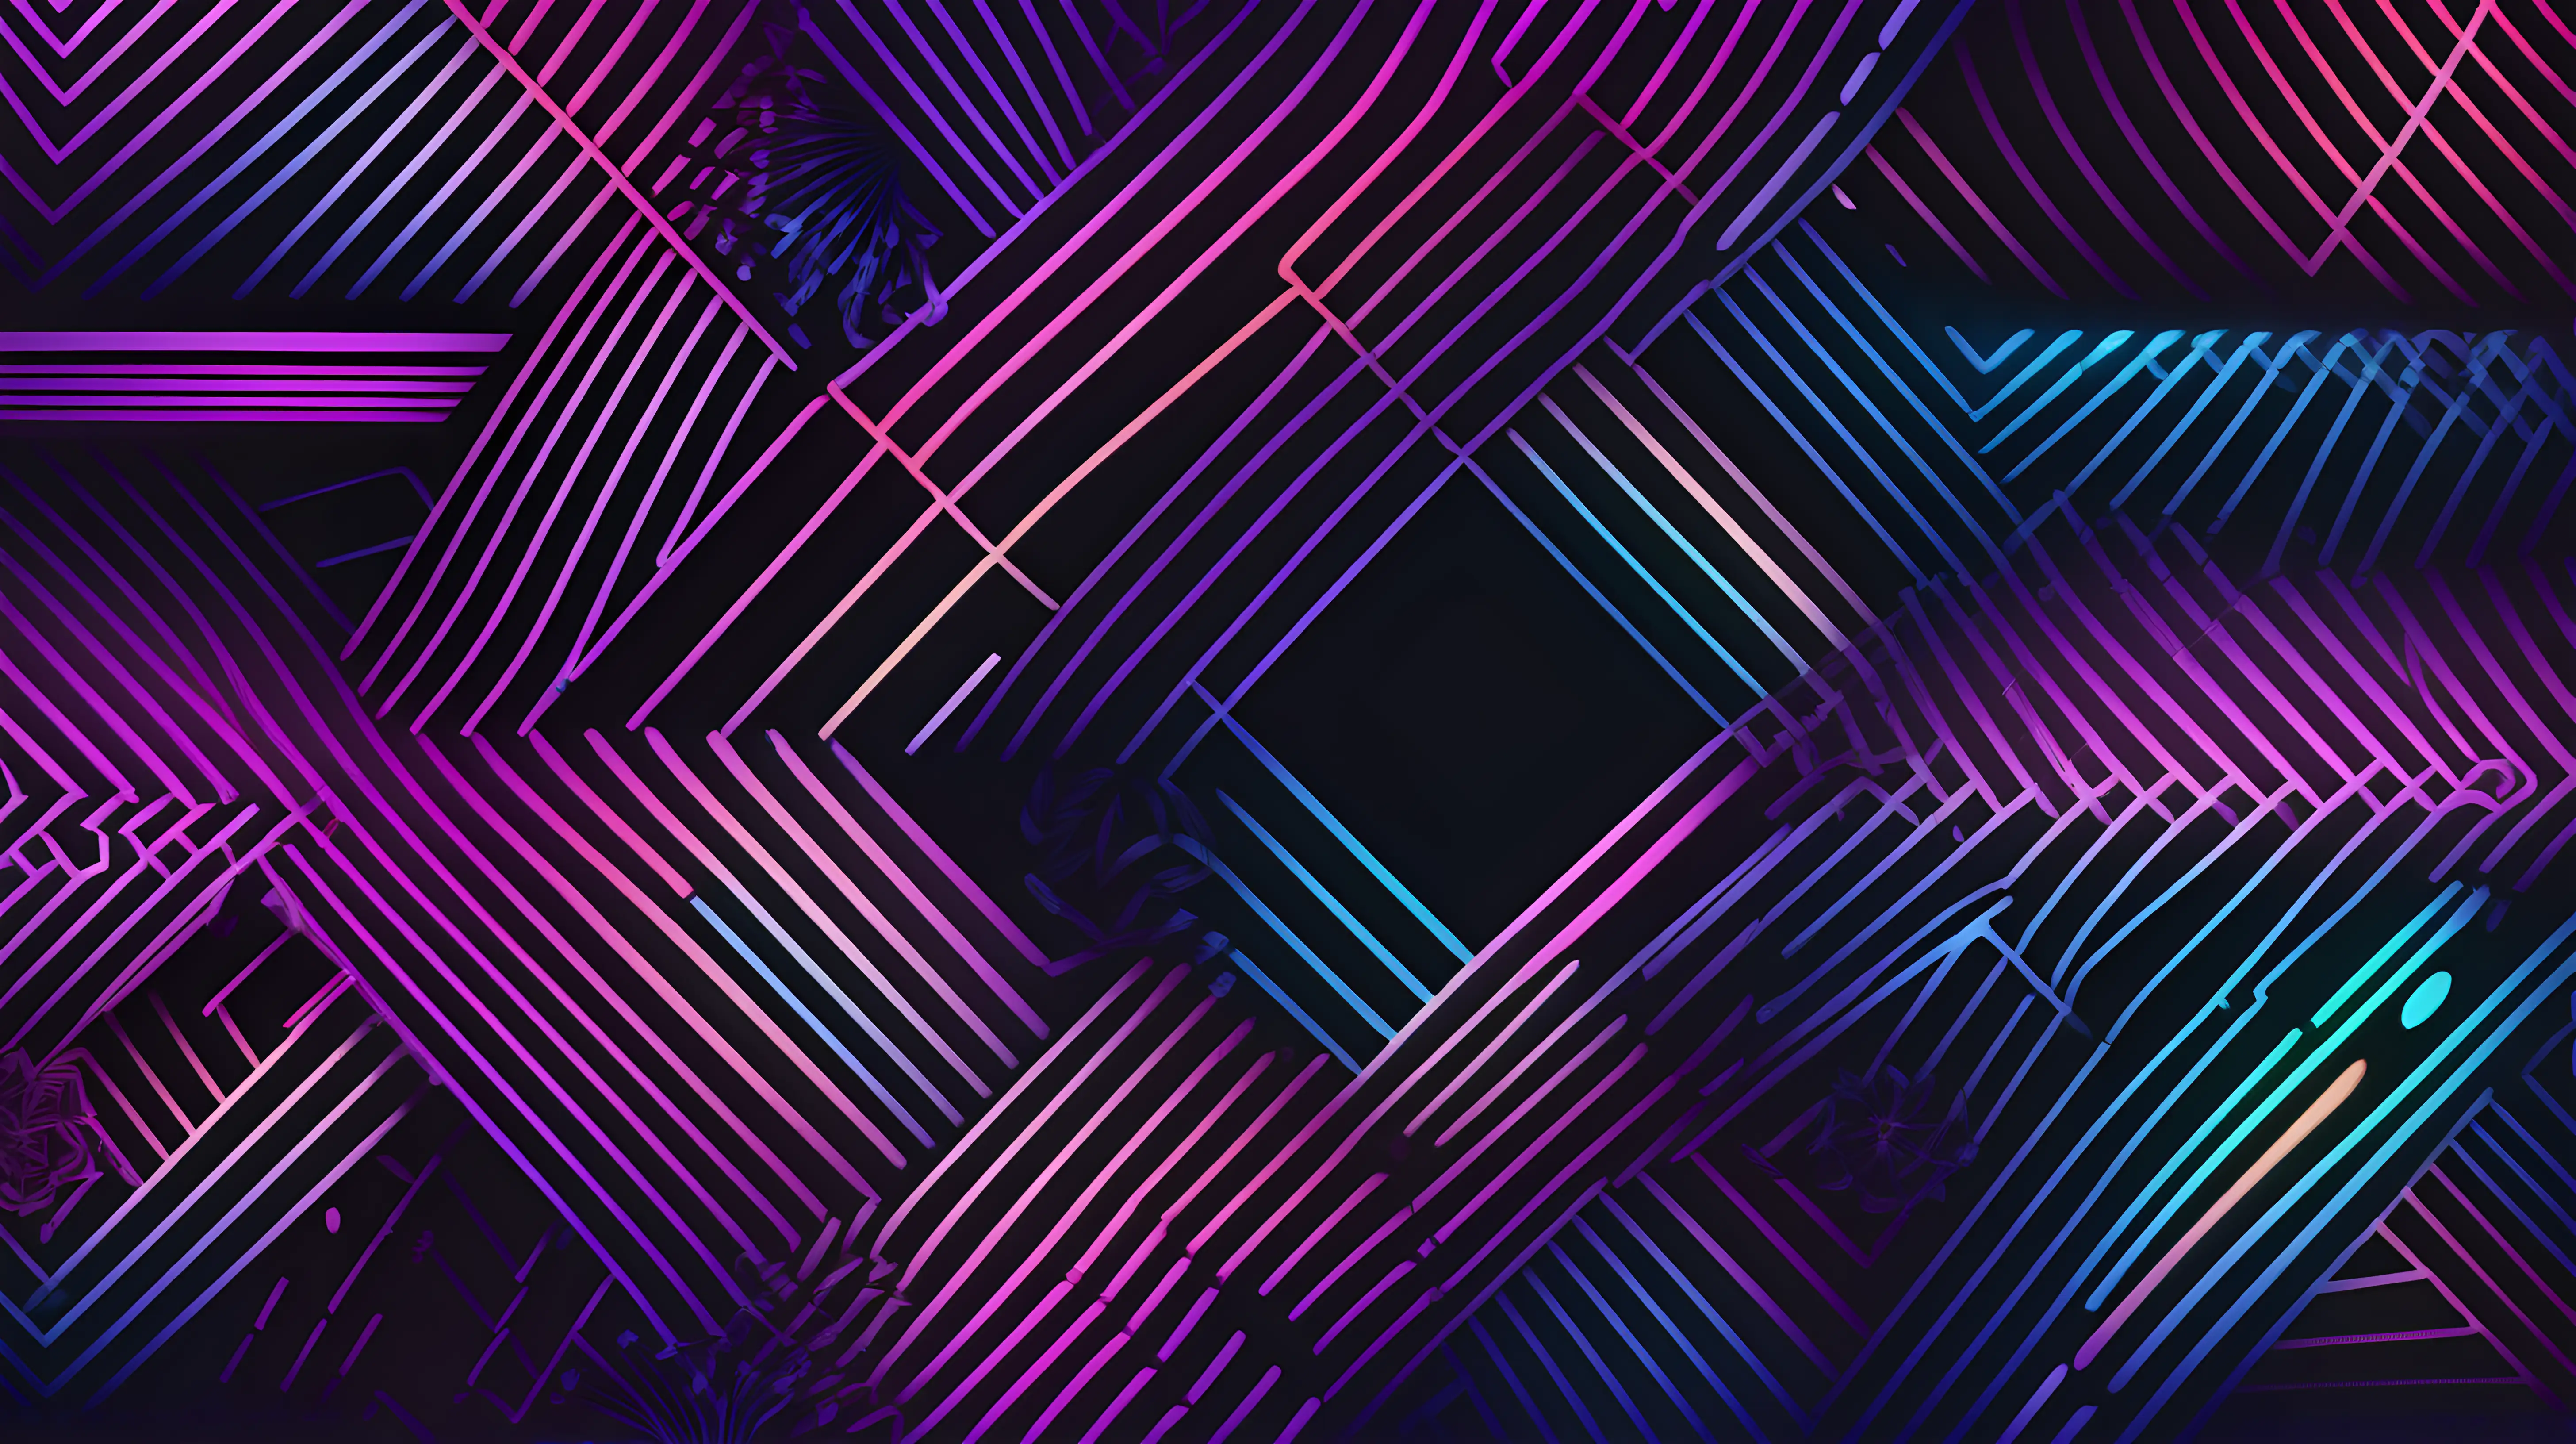 Vibrant Geometric Patterns: Design intricate geometric patterns against a dark background, allowing the neon lines to trace dynamic shapes and create a visually captivating interplay of light and form.